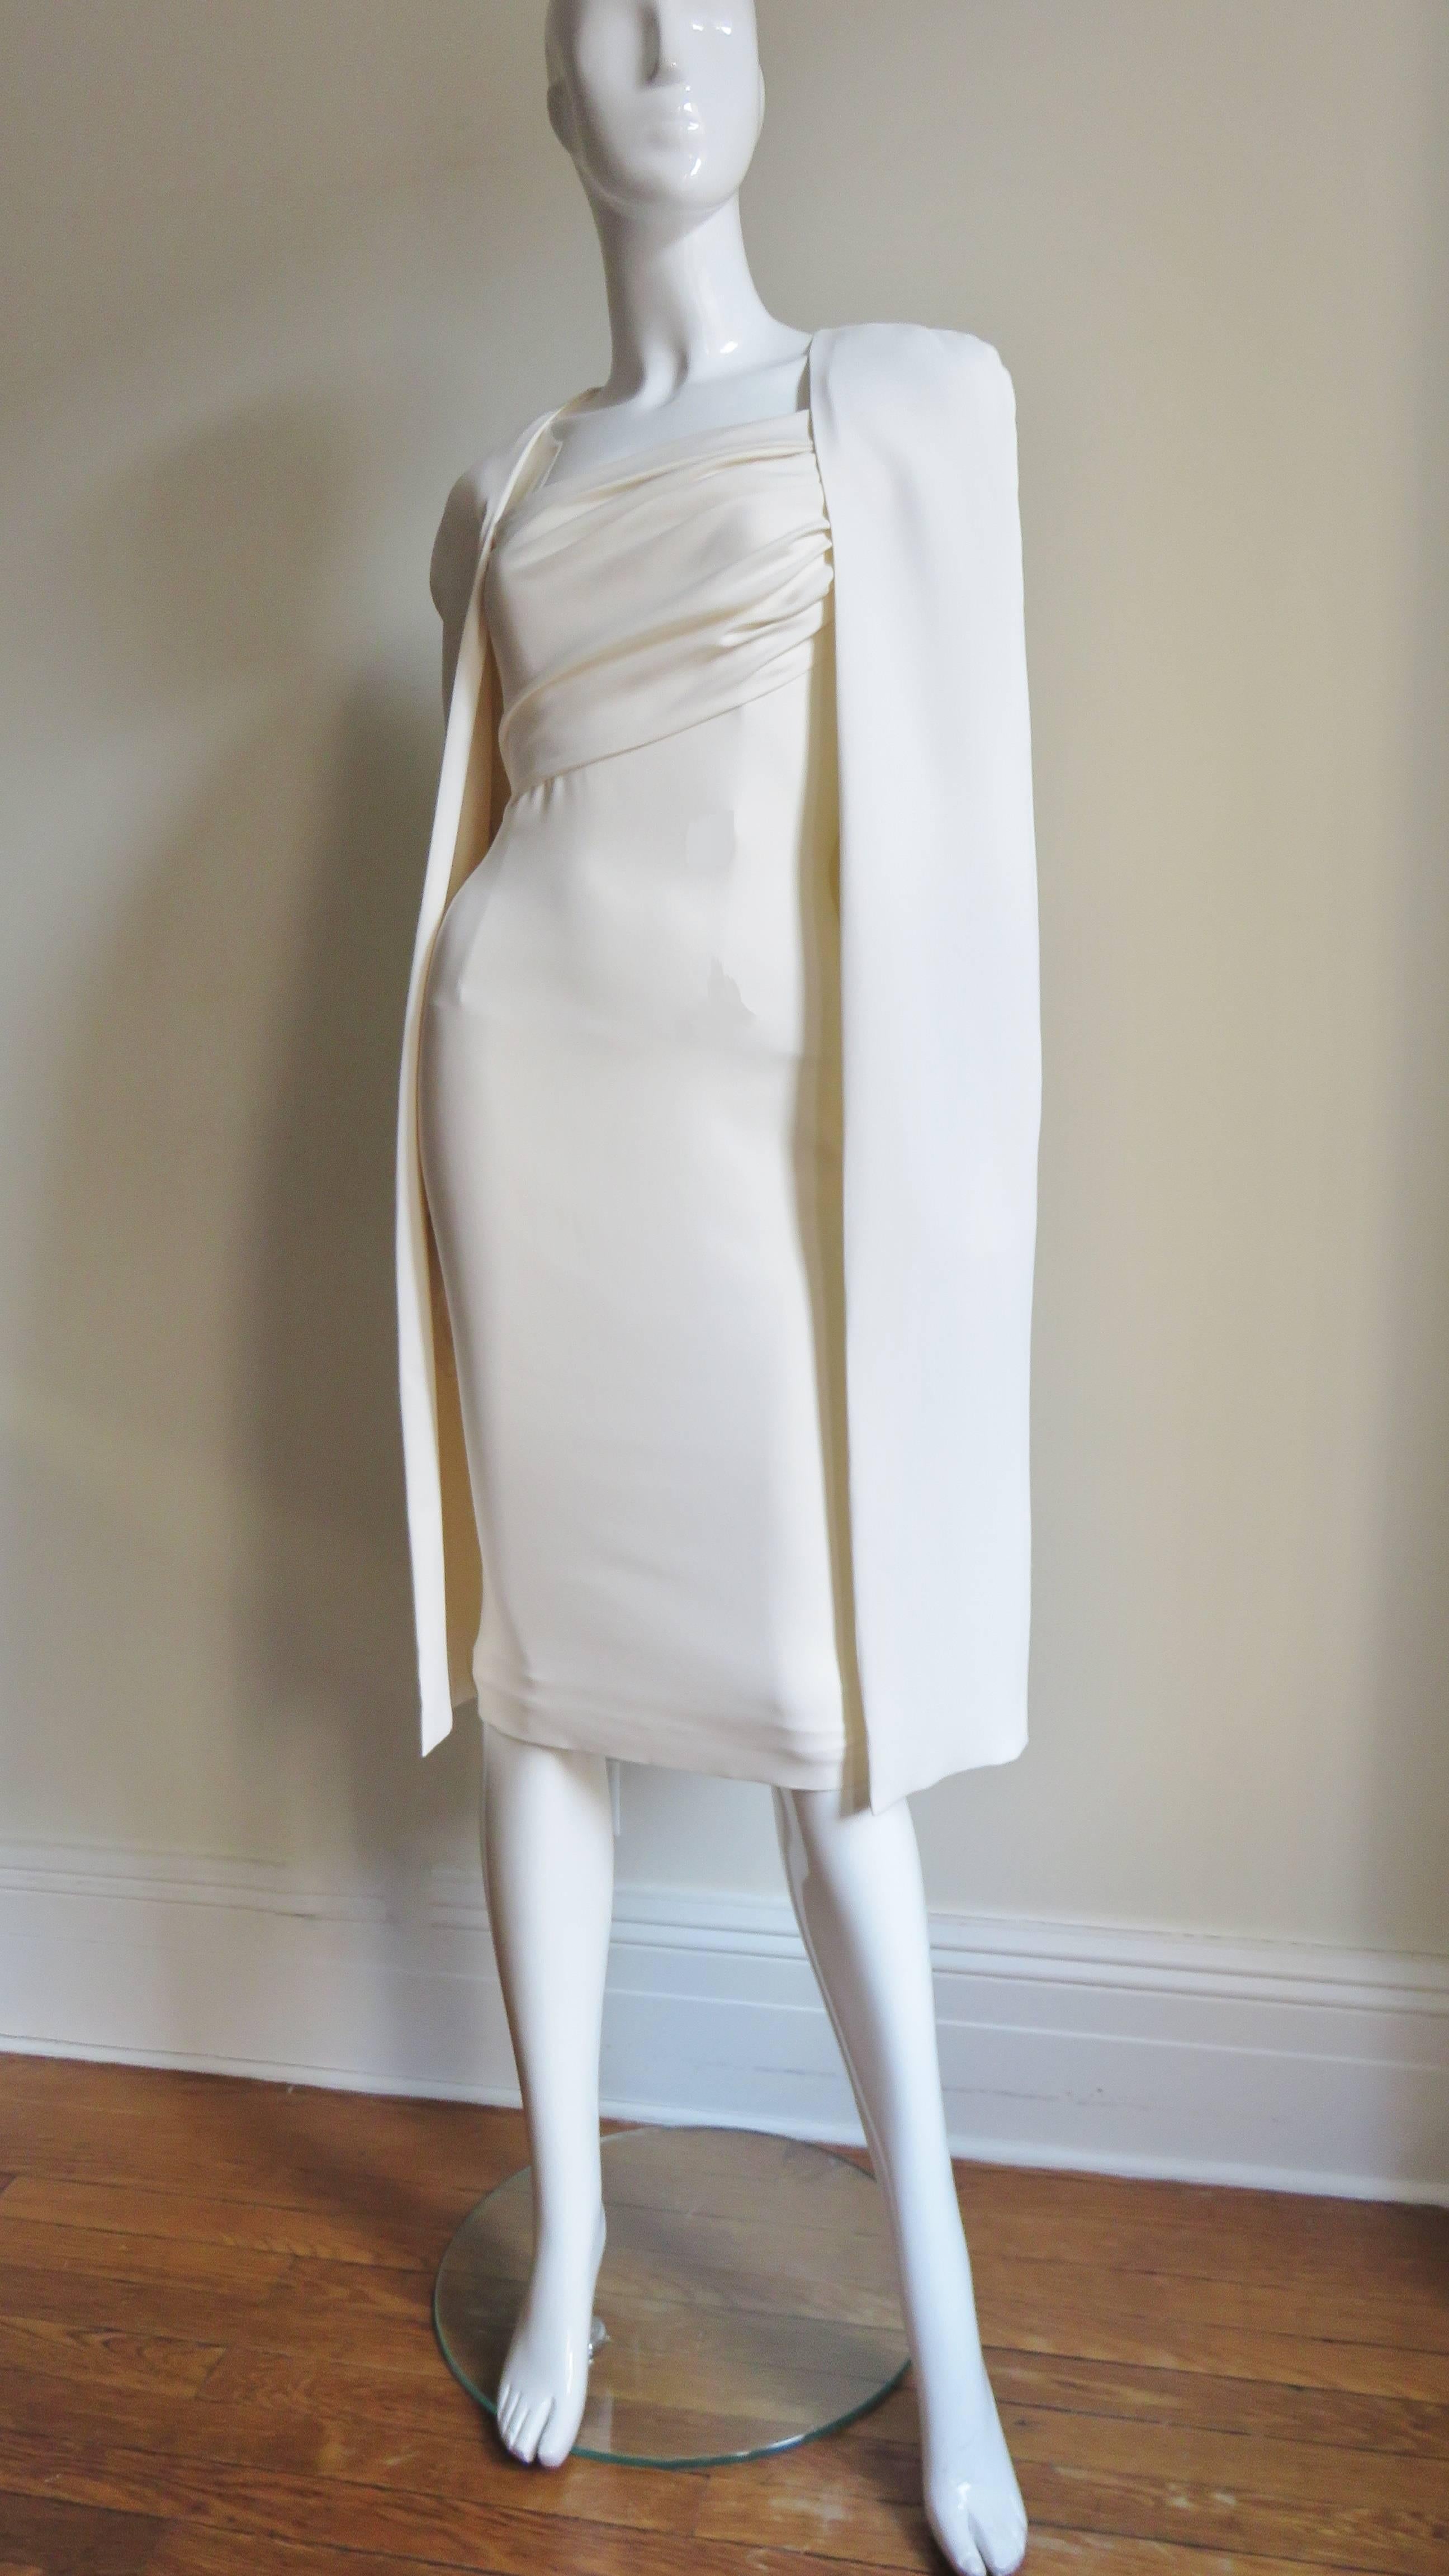 Iconic Tom Ford Academy Award Gwyneth Paltrow New Dress & Cape  In New Condition In Water Mill, NY